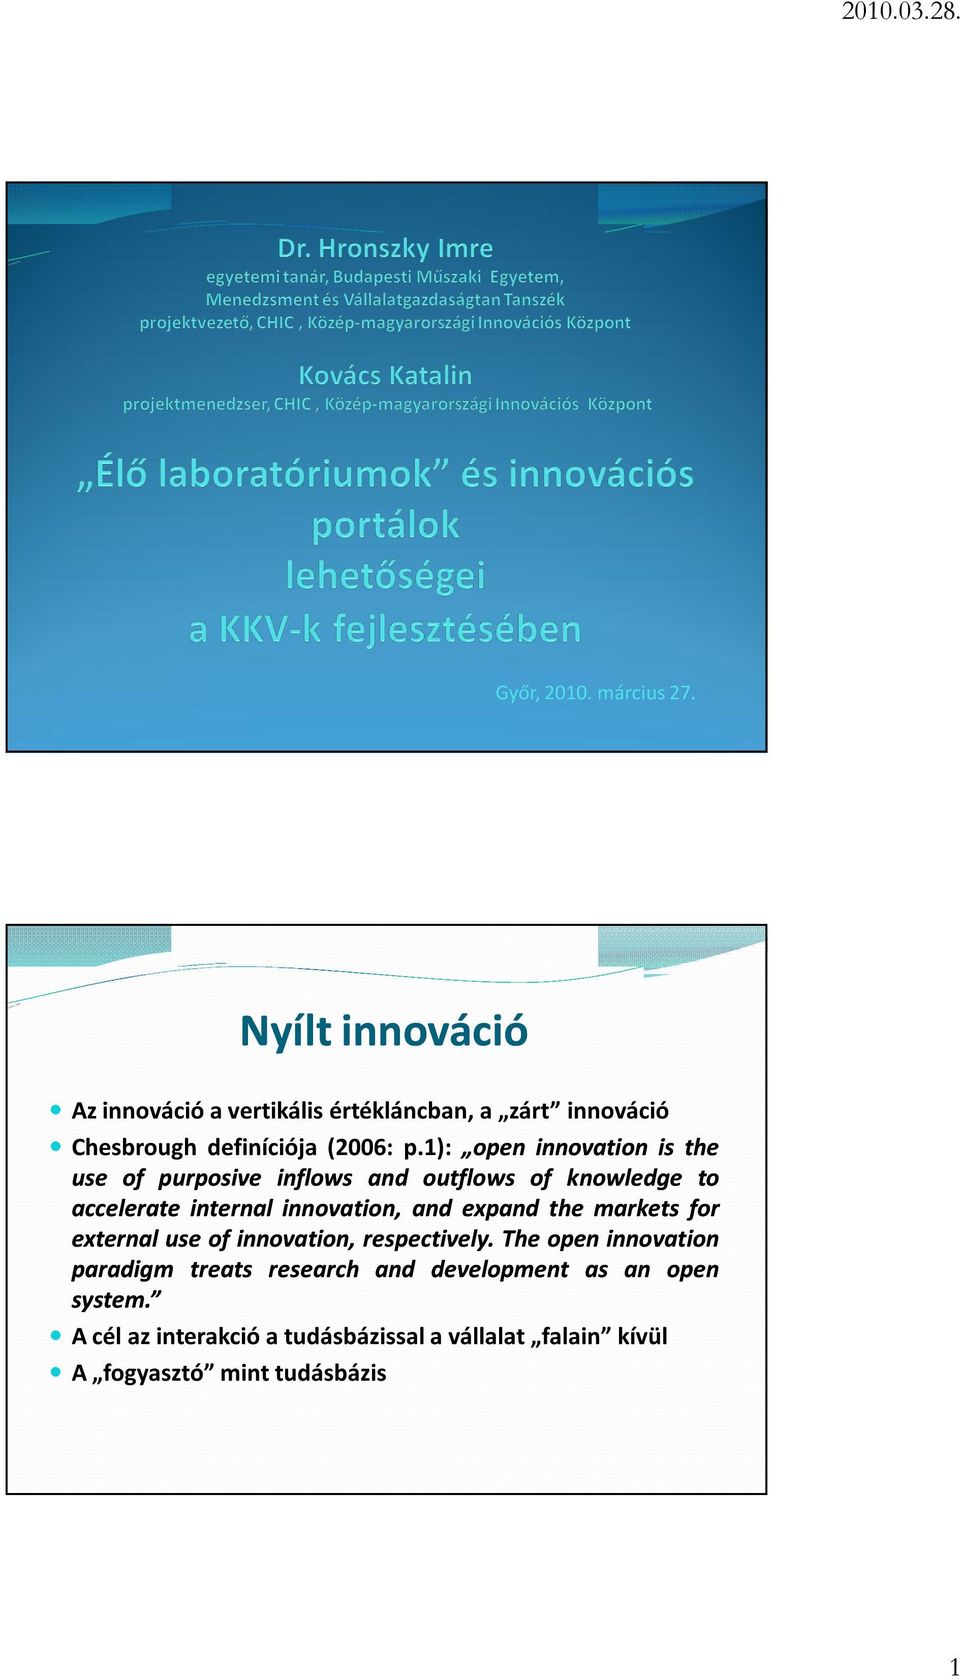 1): open innovation is the use of purposive inflows and outflows of knowledge to accelerate internal innovation, and